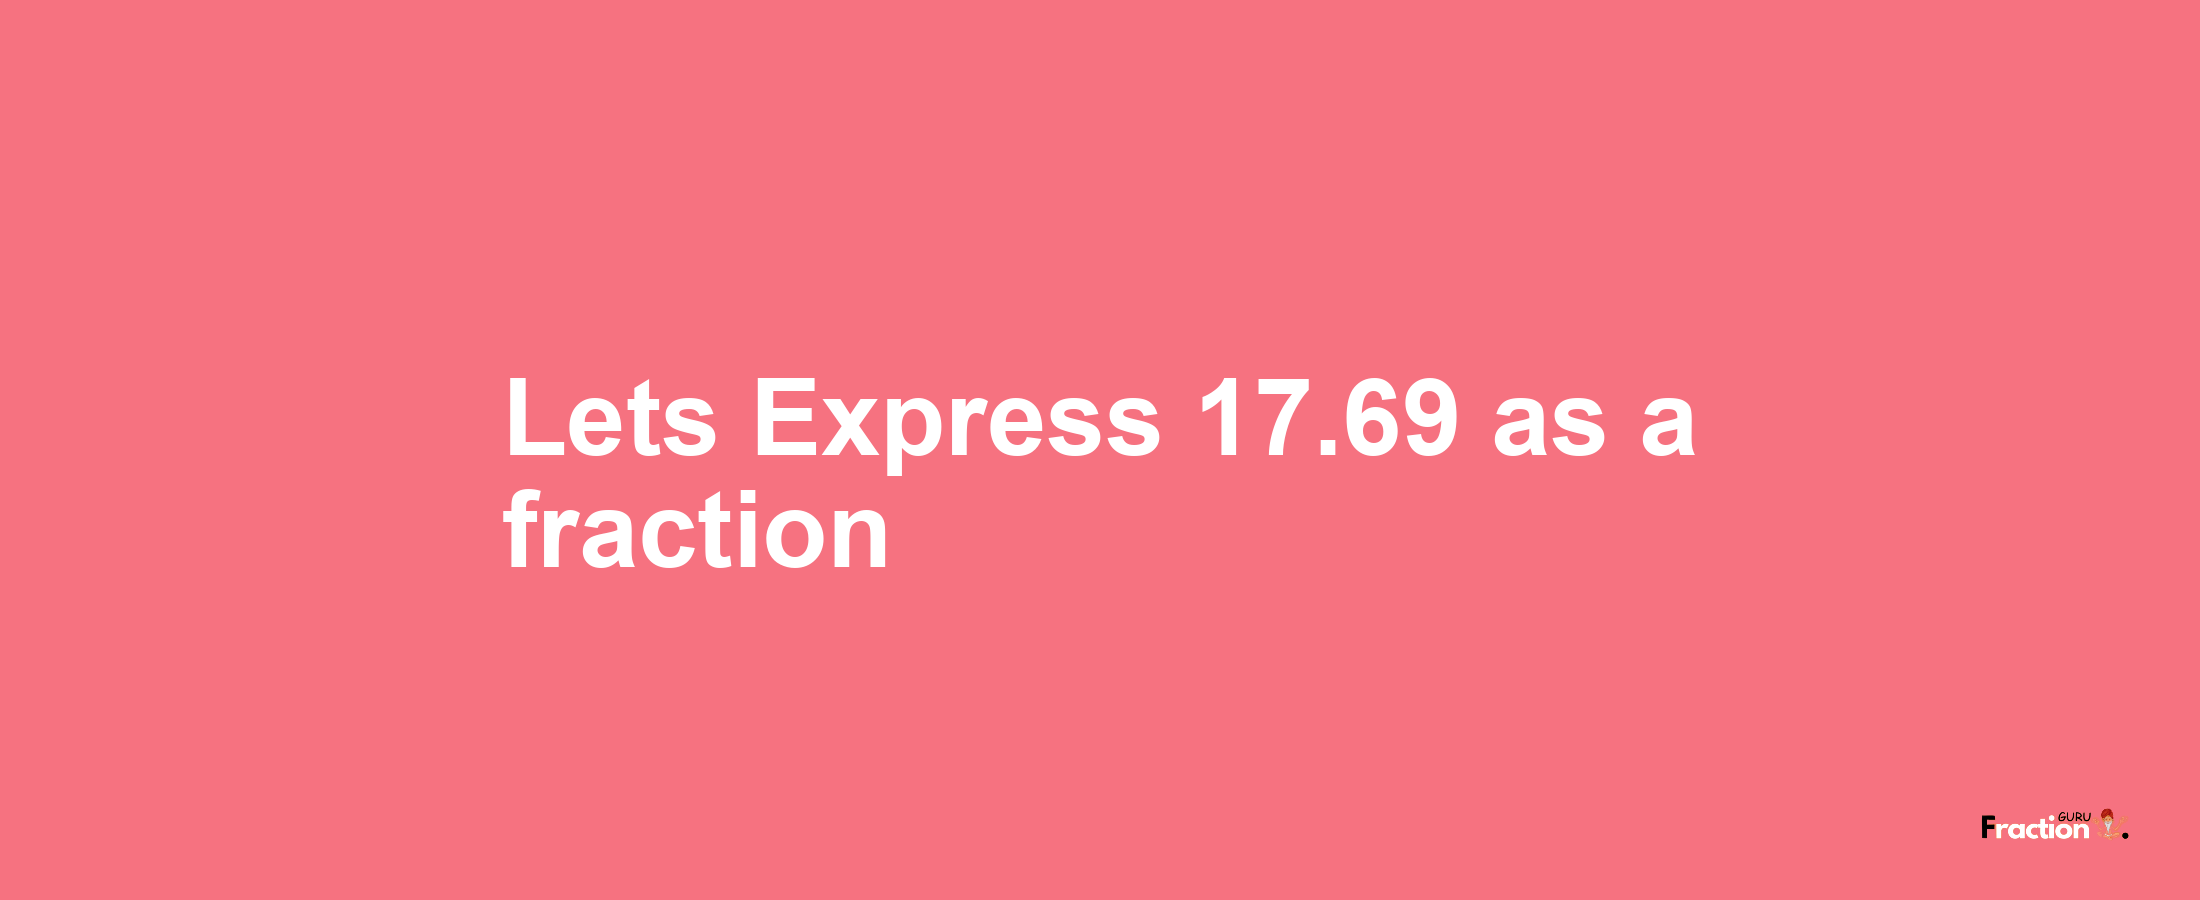 Lets Express 17.69 as afraction